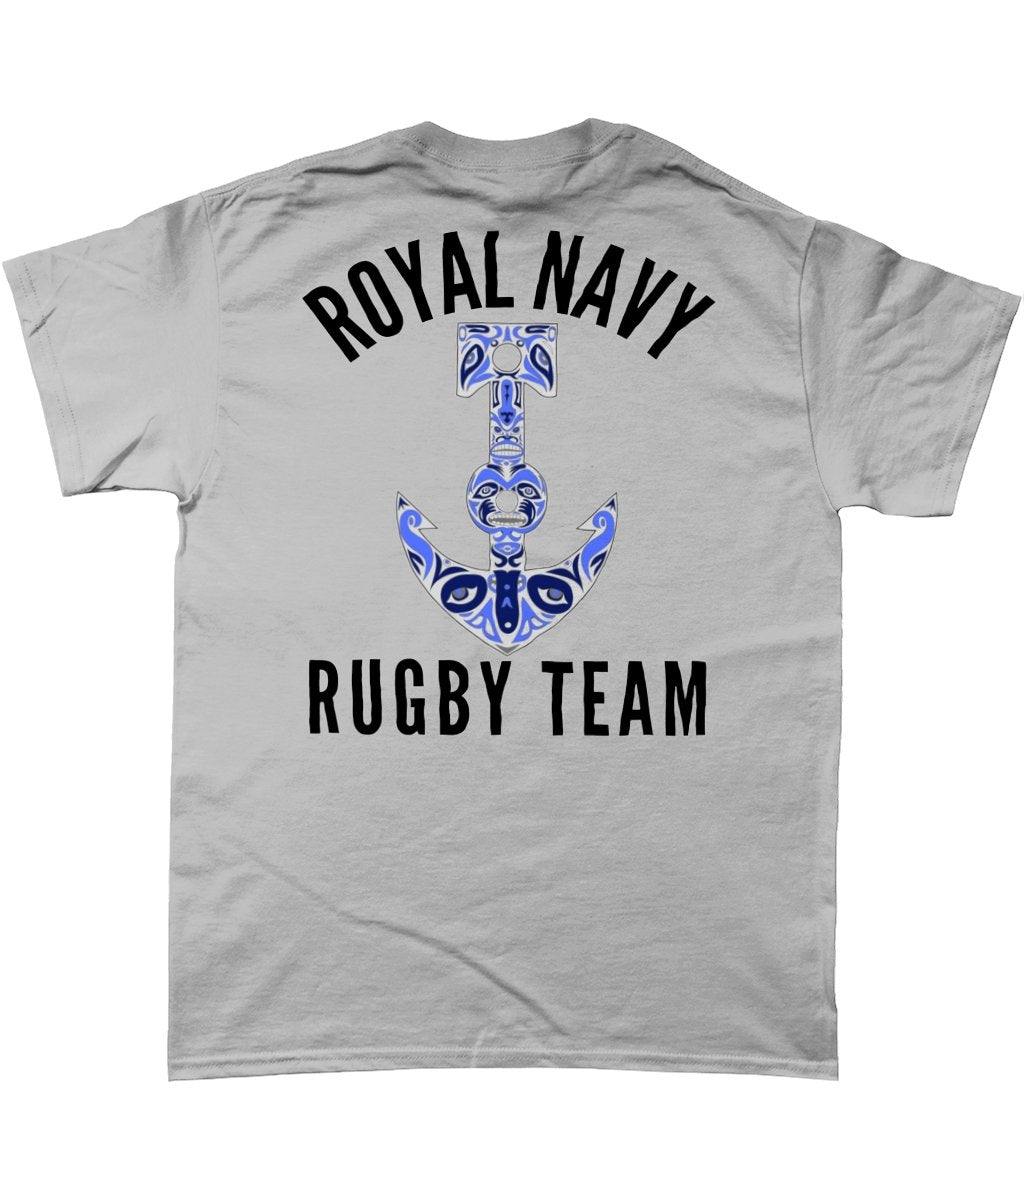 Official Royal Navy Rugby Team Tee - The Chits Inn